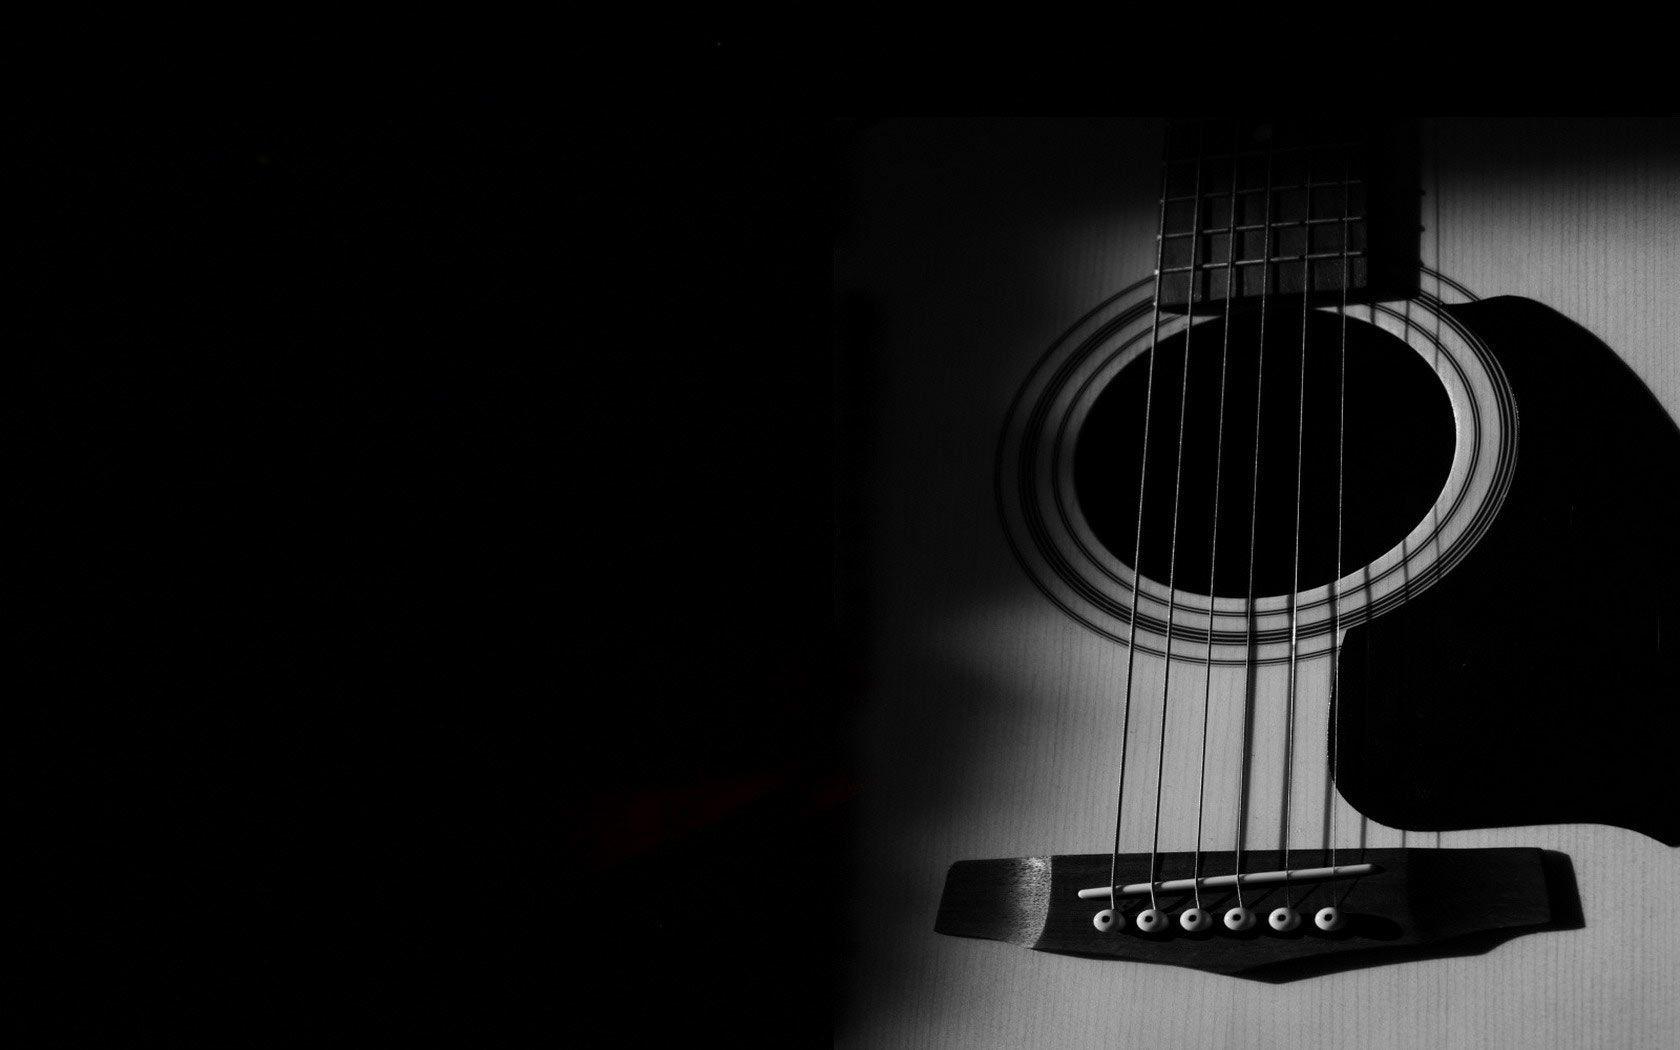 Download this awesome wallpaper. Guitar, Easy guitar, Takamine guitars